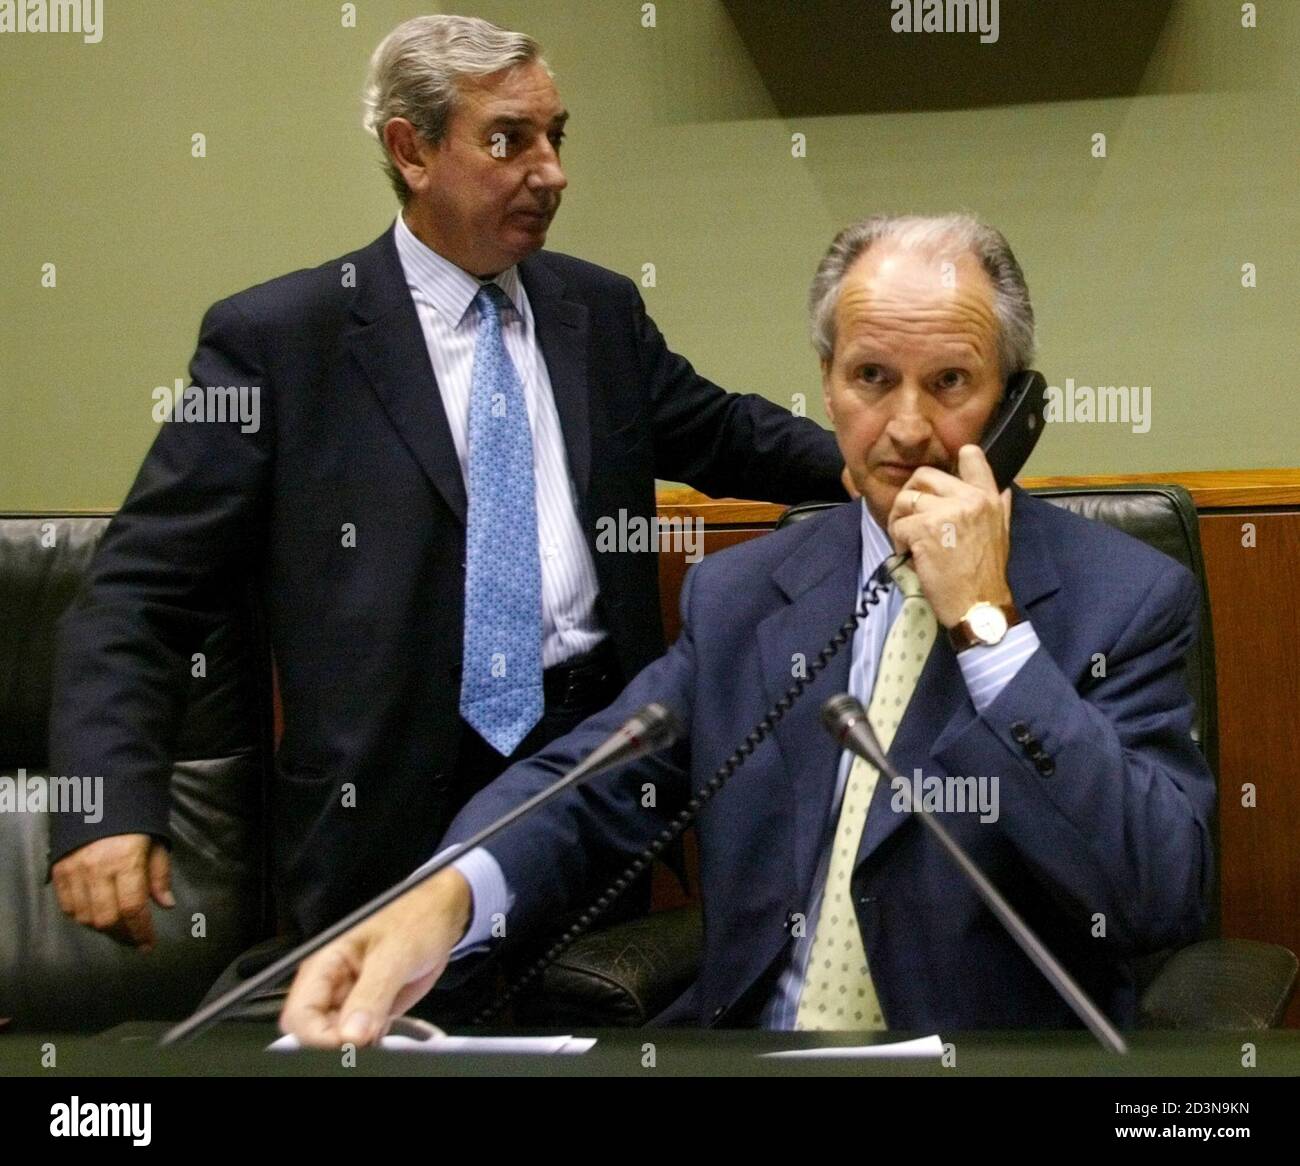 Juan Maria Atutxa, president of Basque parliament, talks on a telephone beside Basque Nationalists Party (PNV) deputy Jose Antonio Rubalkaba at the Basque parliament in Vitoria June 20, 2003. Spain's public prosecutor ordered Basque courts to open a criminal investigation into the leaders of the regional parliament for defying a Supreme Court order to dissolve a party linked to ETA. REUTERS/Vincent West  SP/WS Stock Photo